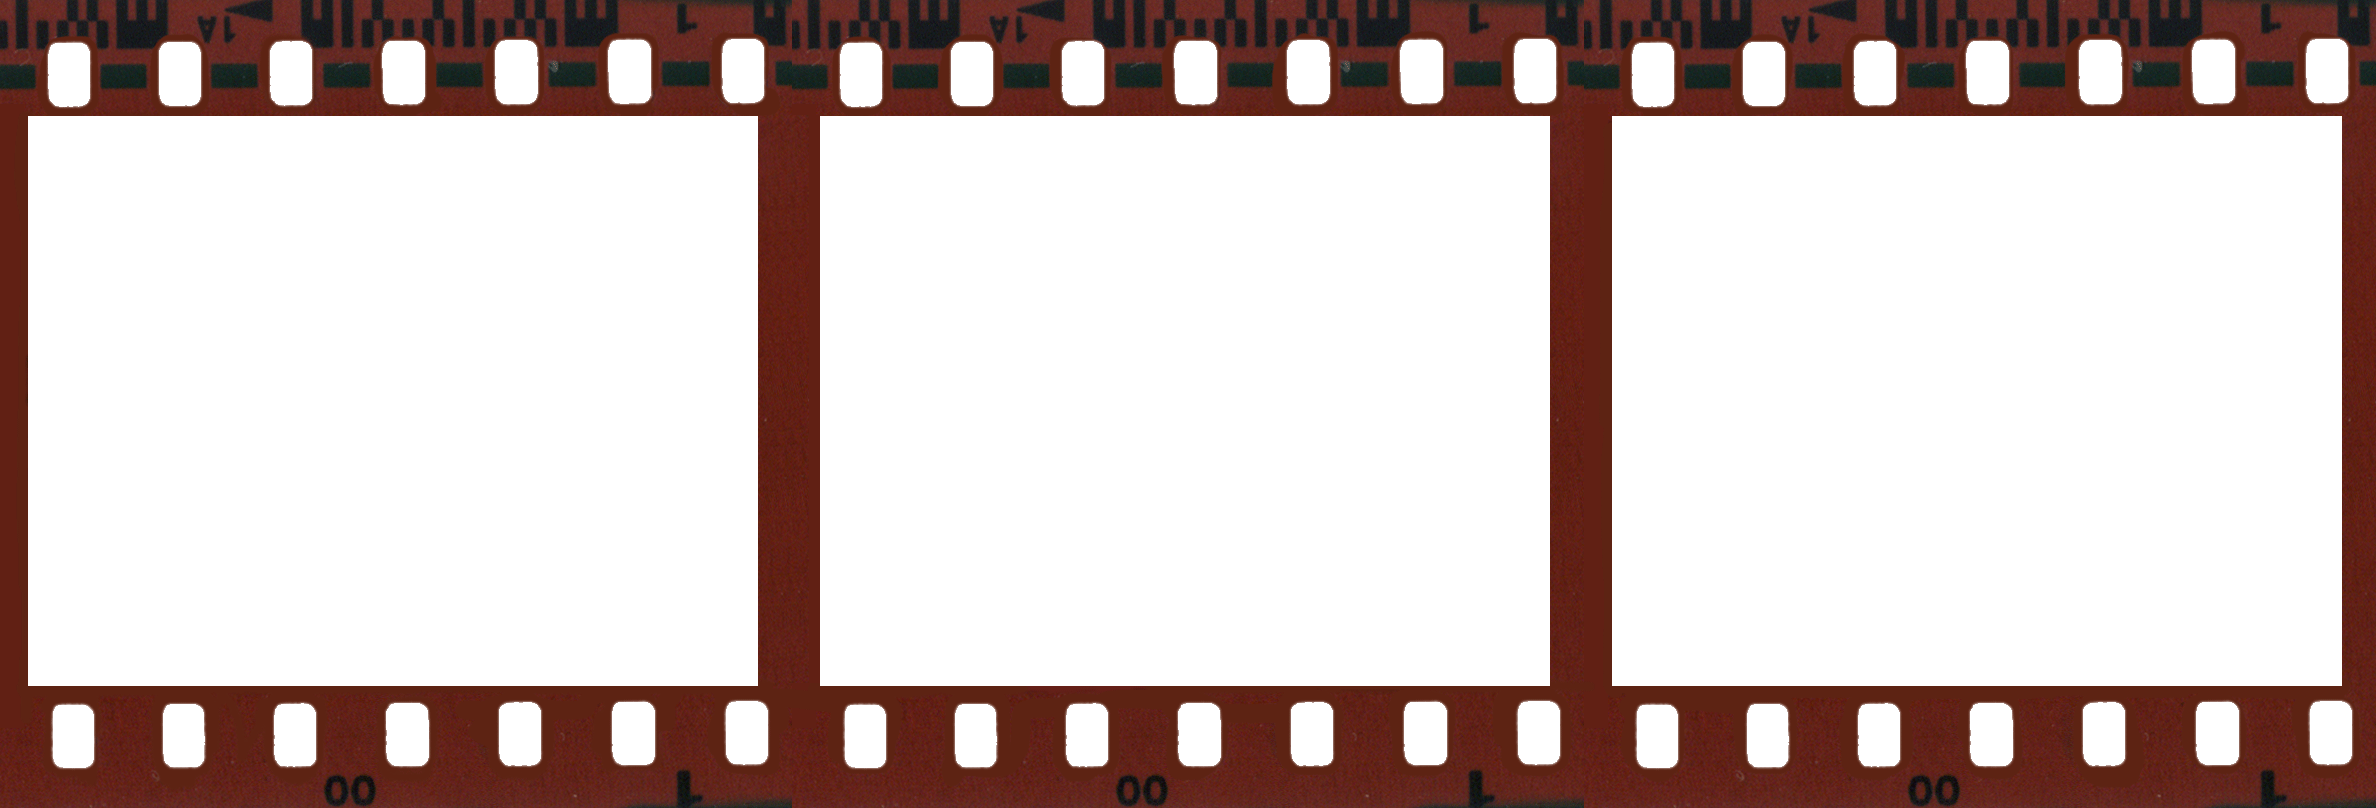 Border free download best. Movies clipart movie camera